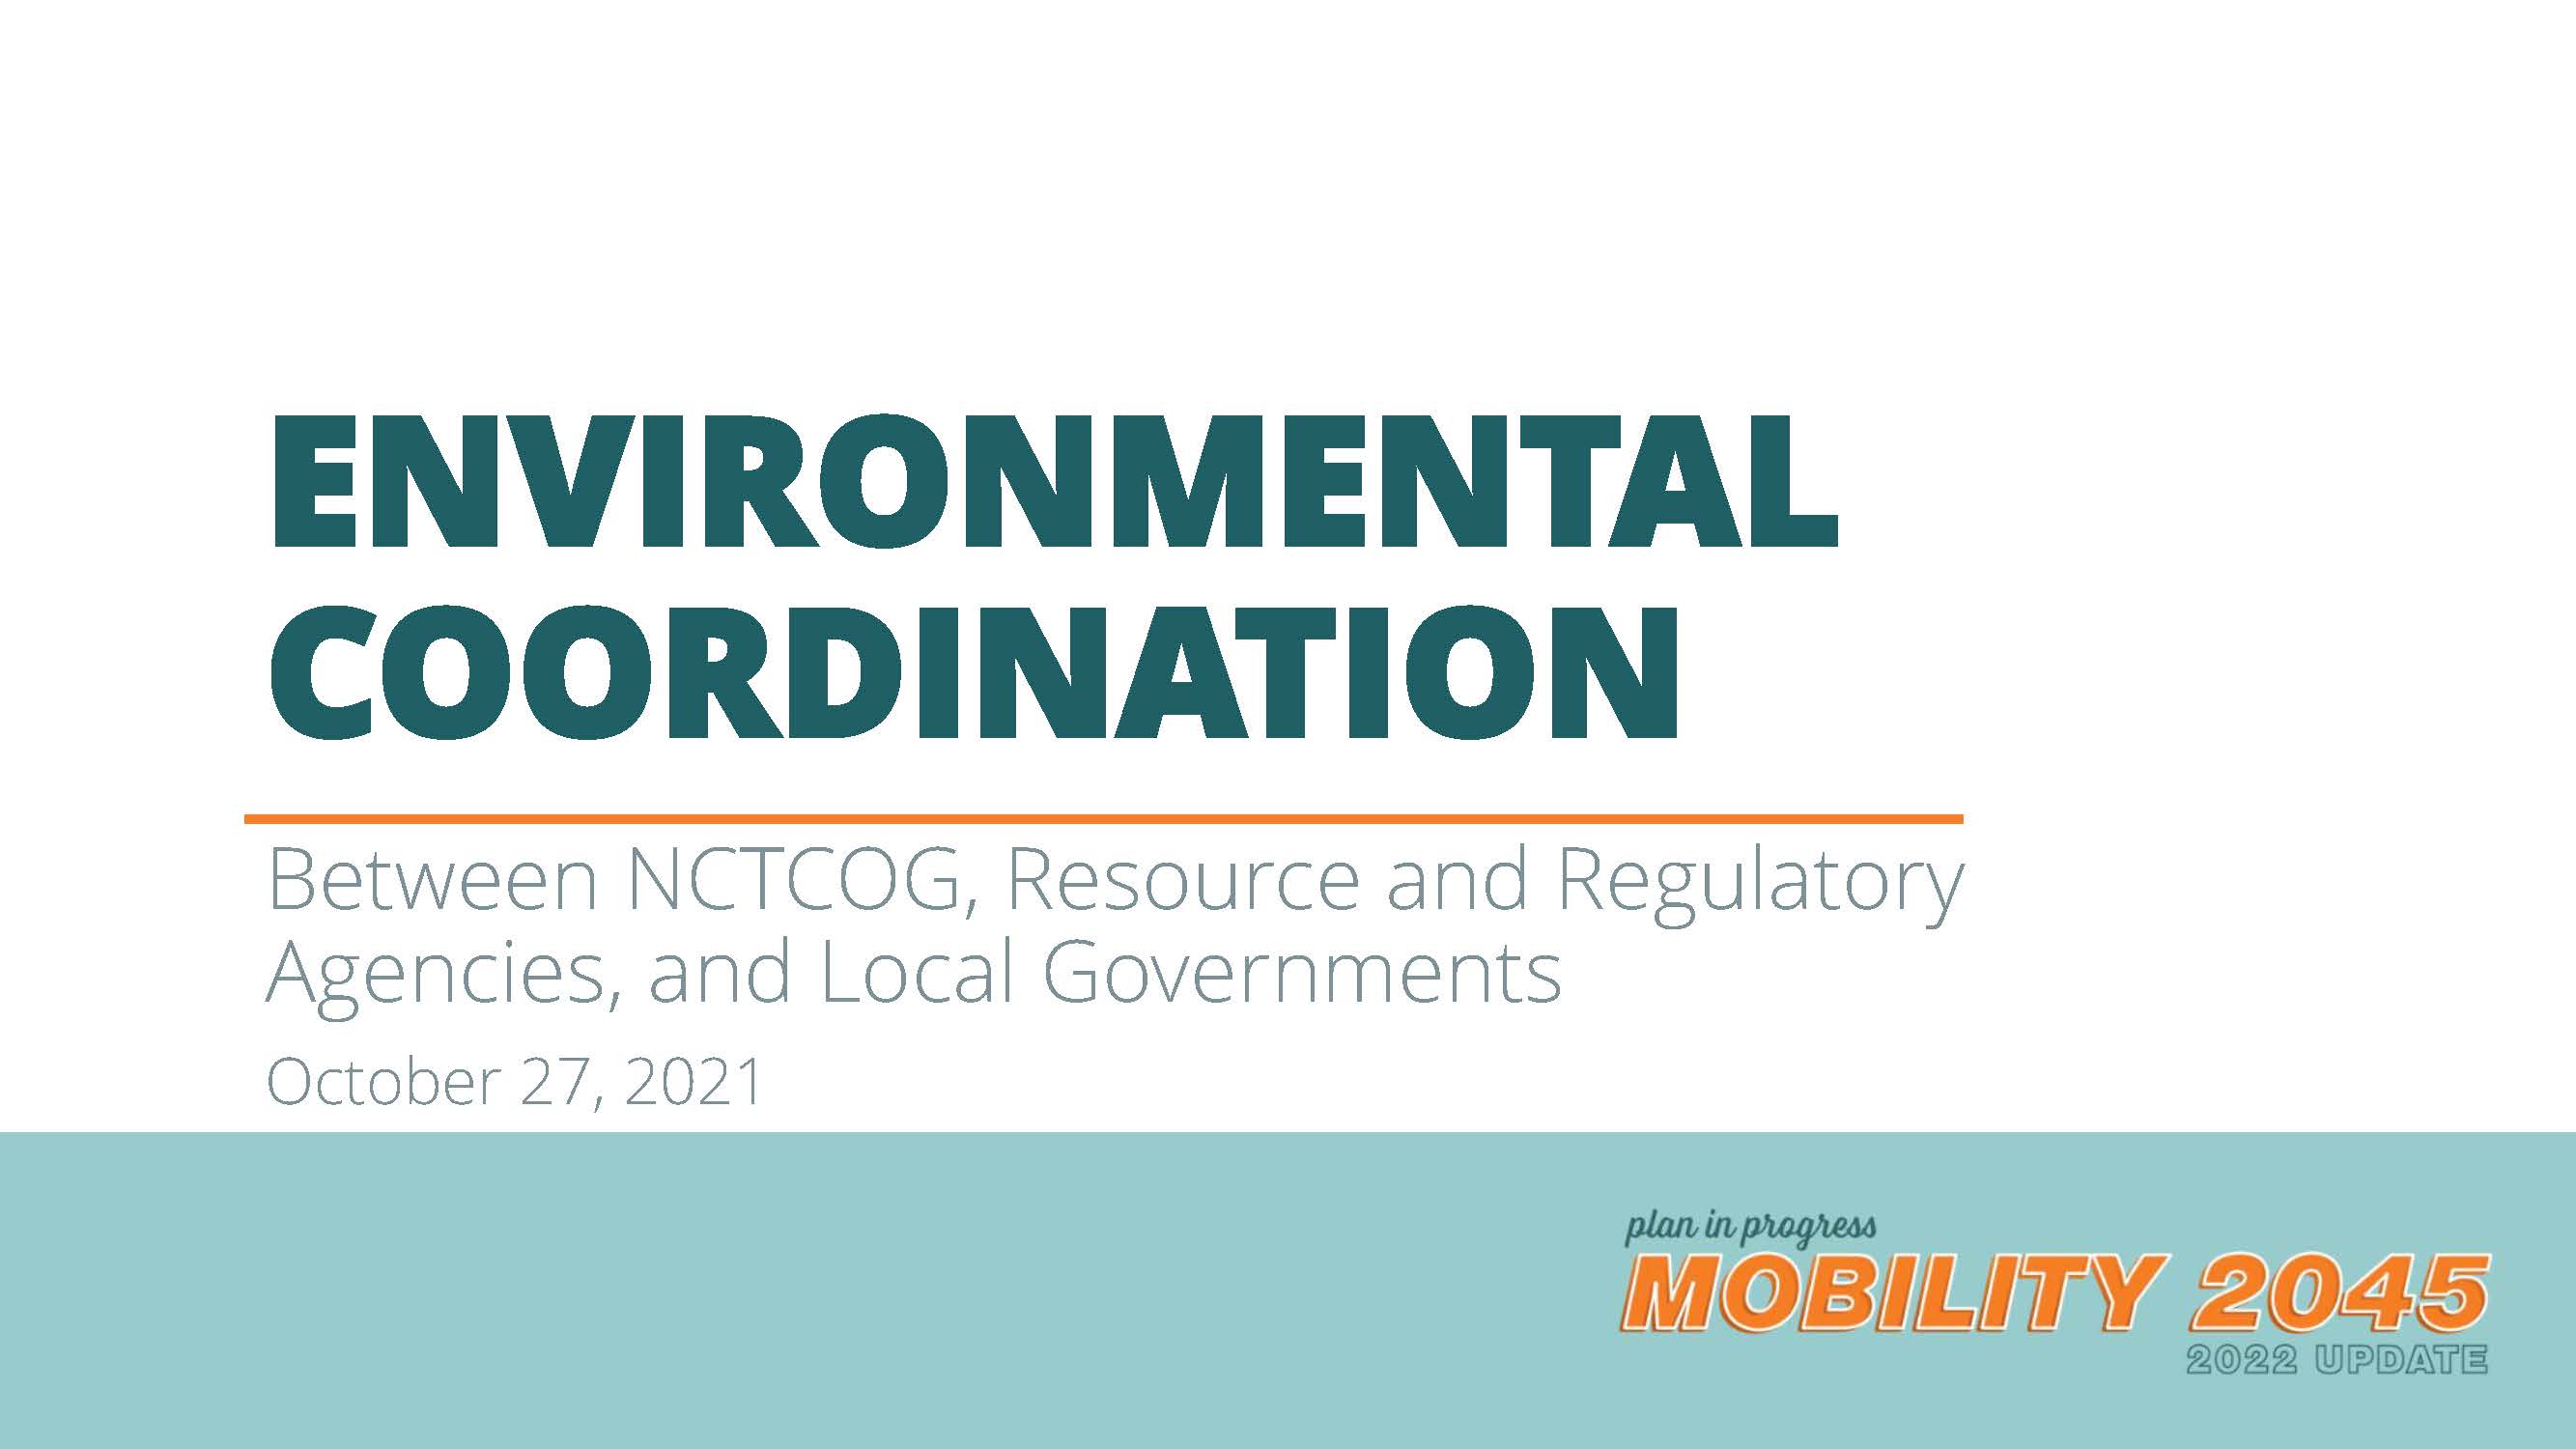 Environmental Coordination Between NCTCOG, Resource and Regulatory Agencies, and Local Governments